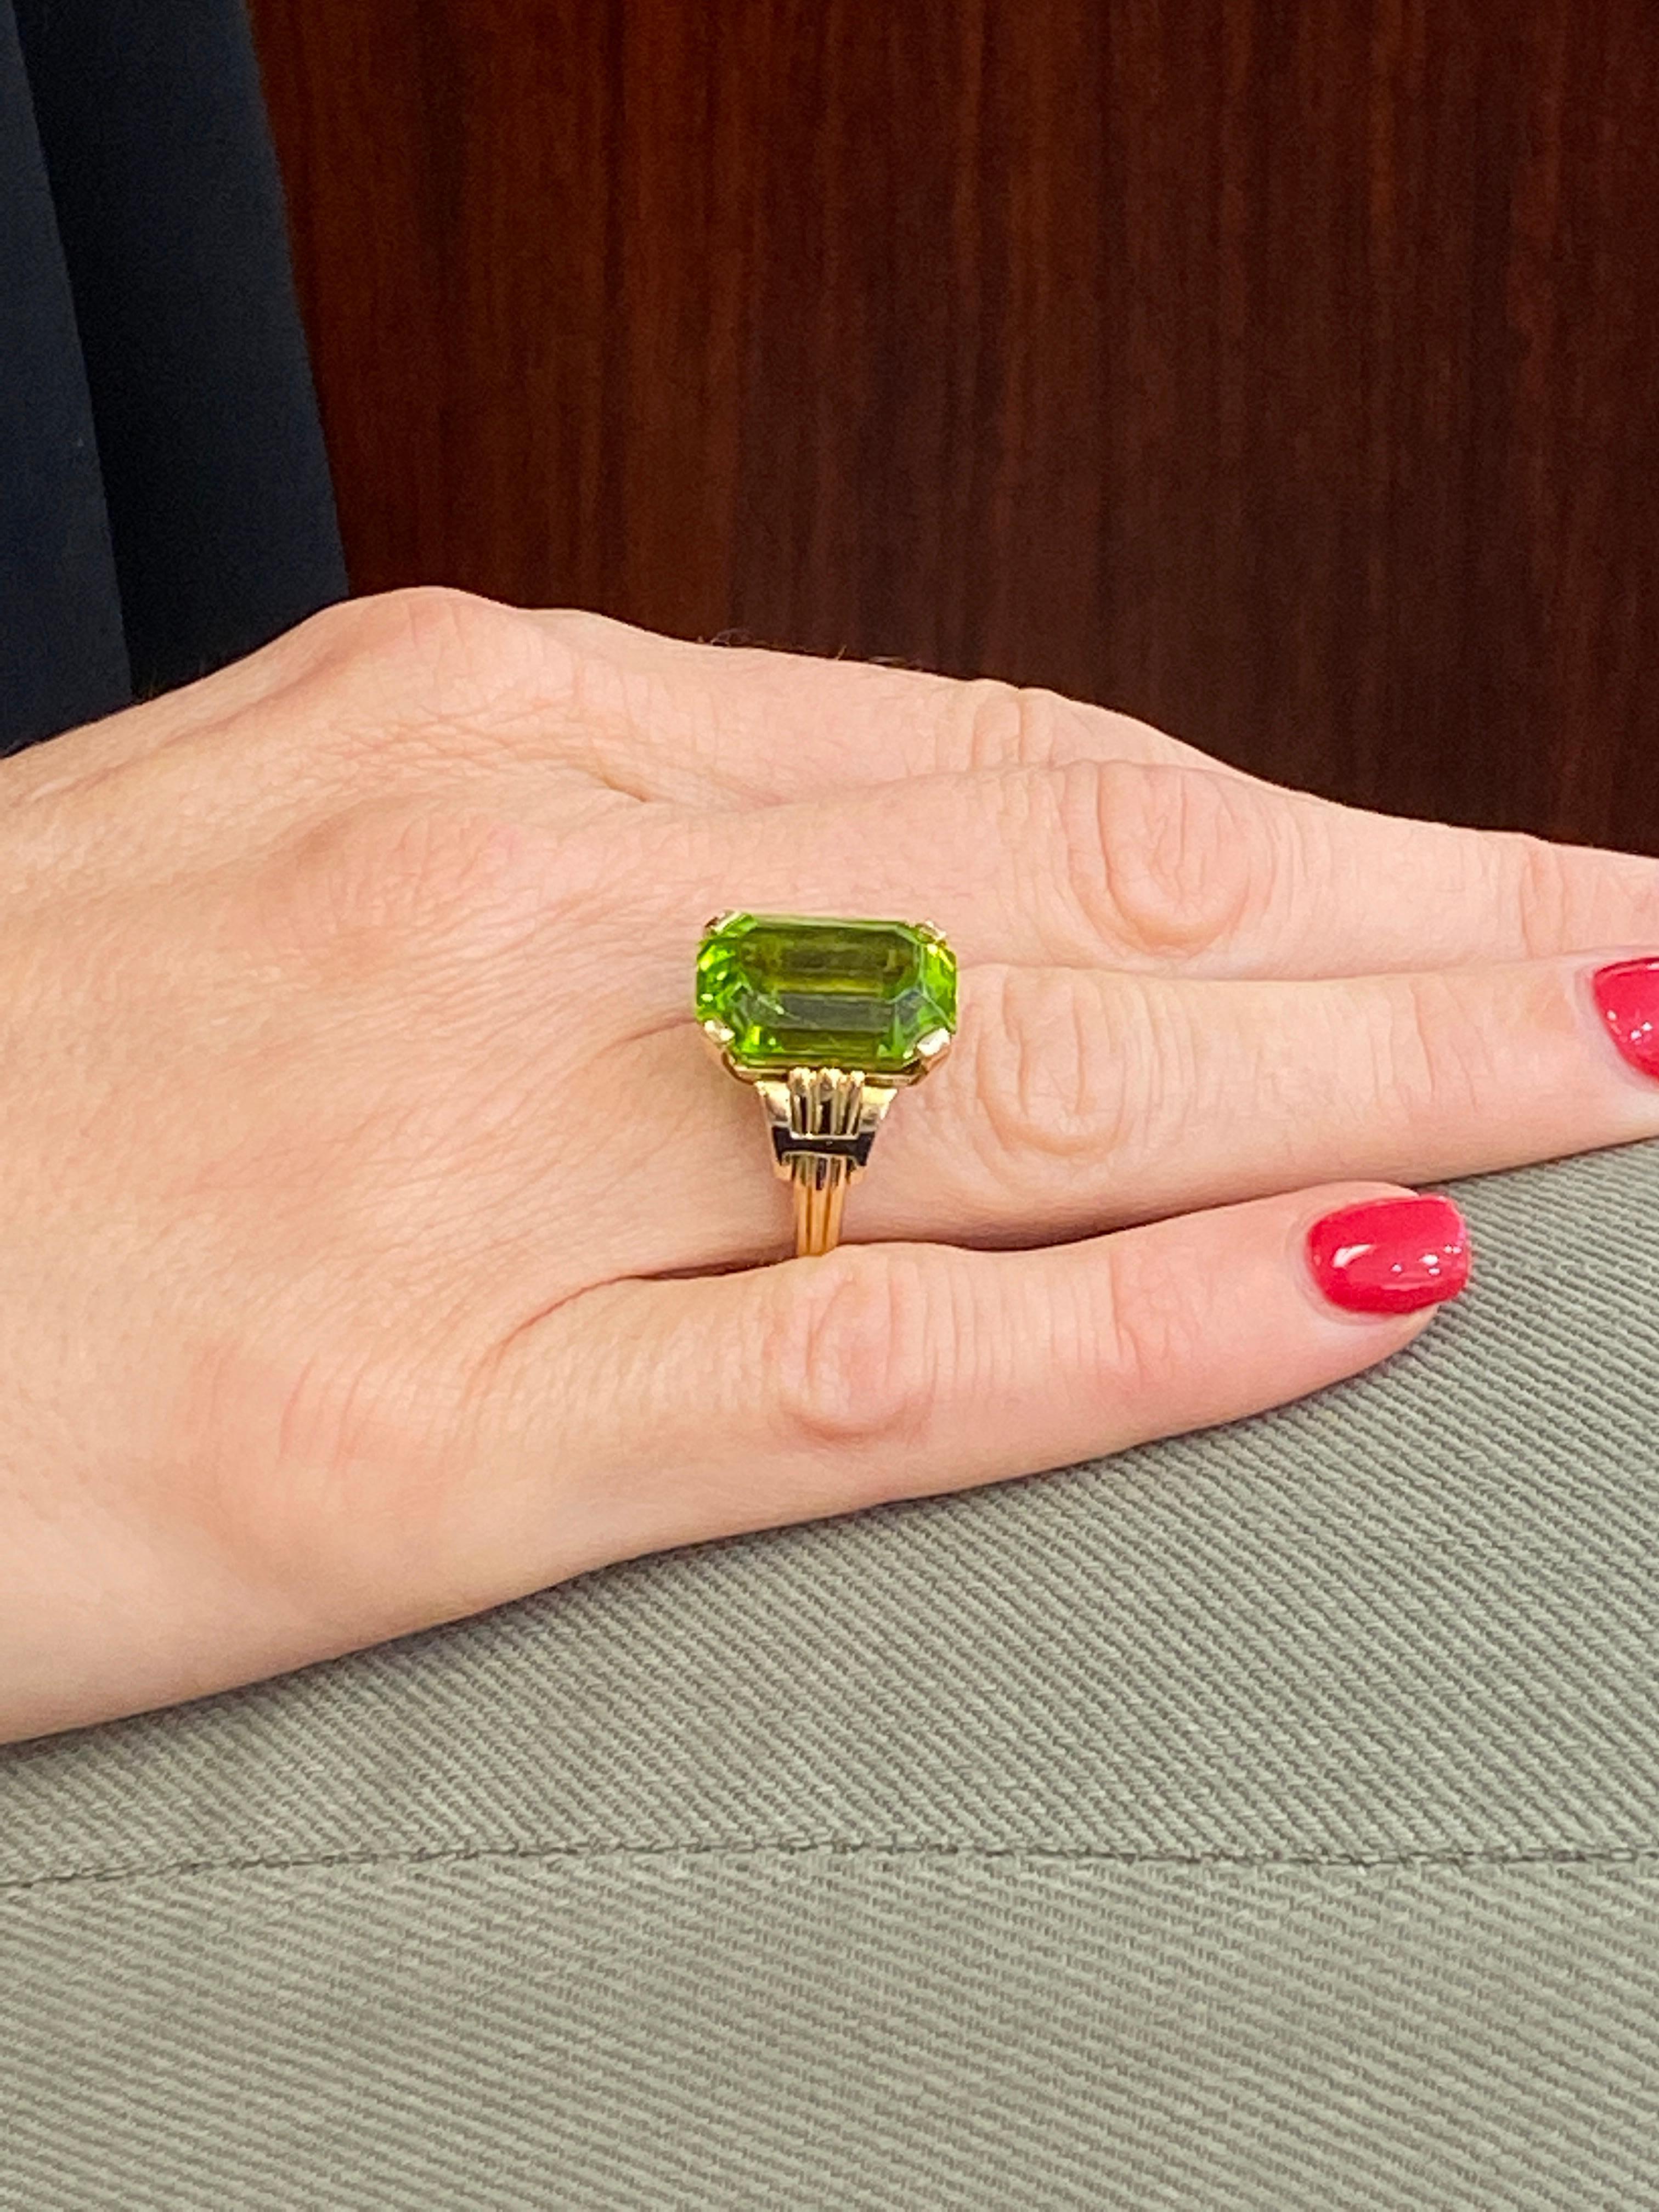 Tiffany & Company Vintage Peridot Ring fashioned in 14 karat yellow gold. The emerald cut peridot gemstone weighs approximately 12 carats, has a beautiful yellowish green color, and has been certified by the AGL. The peridot has not had any